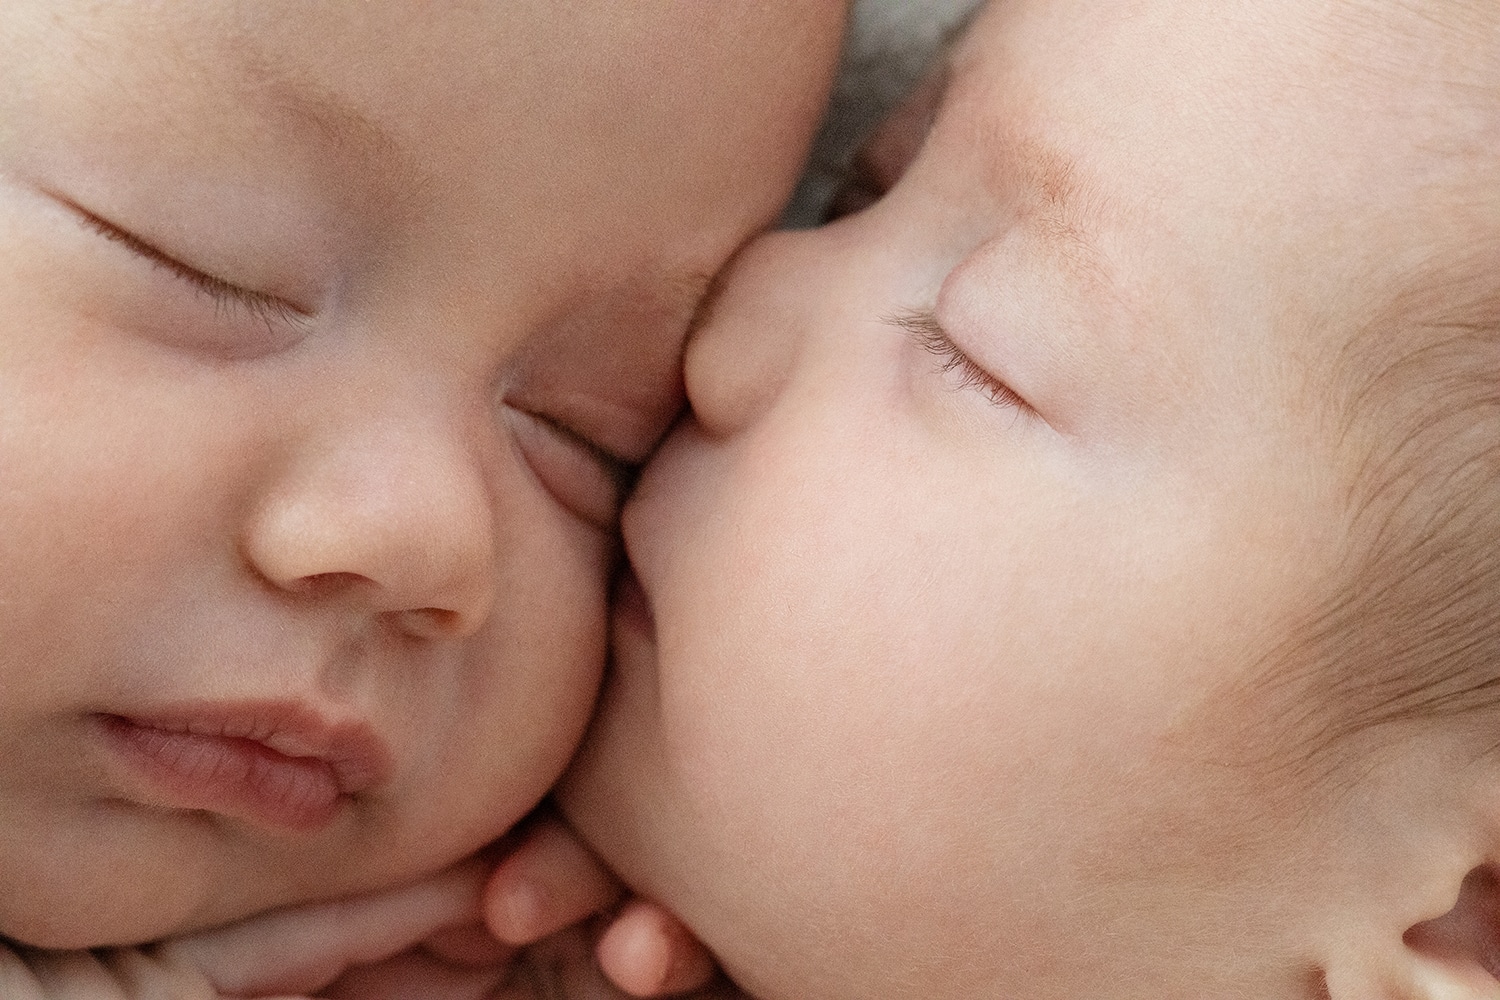 Two newborn babies kiss one another.